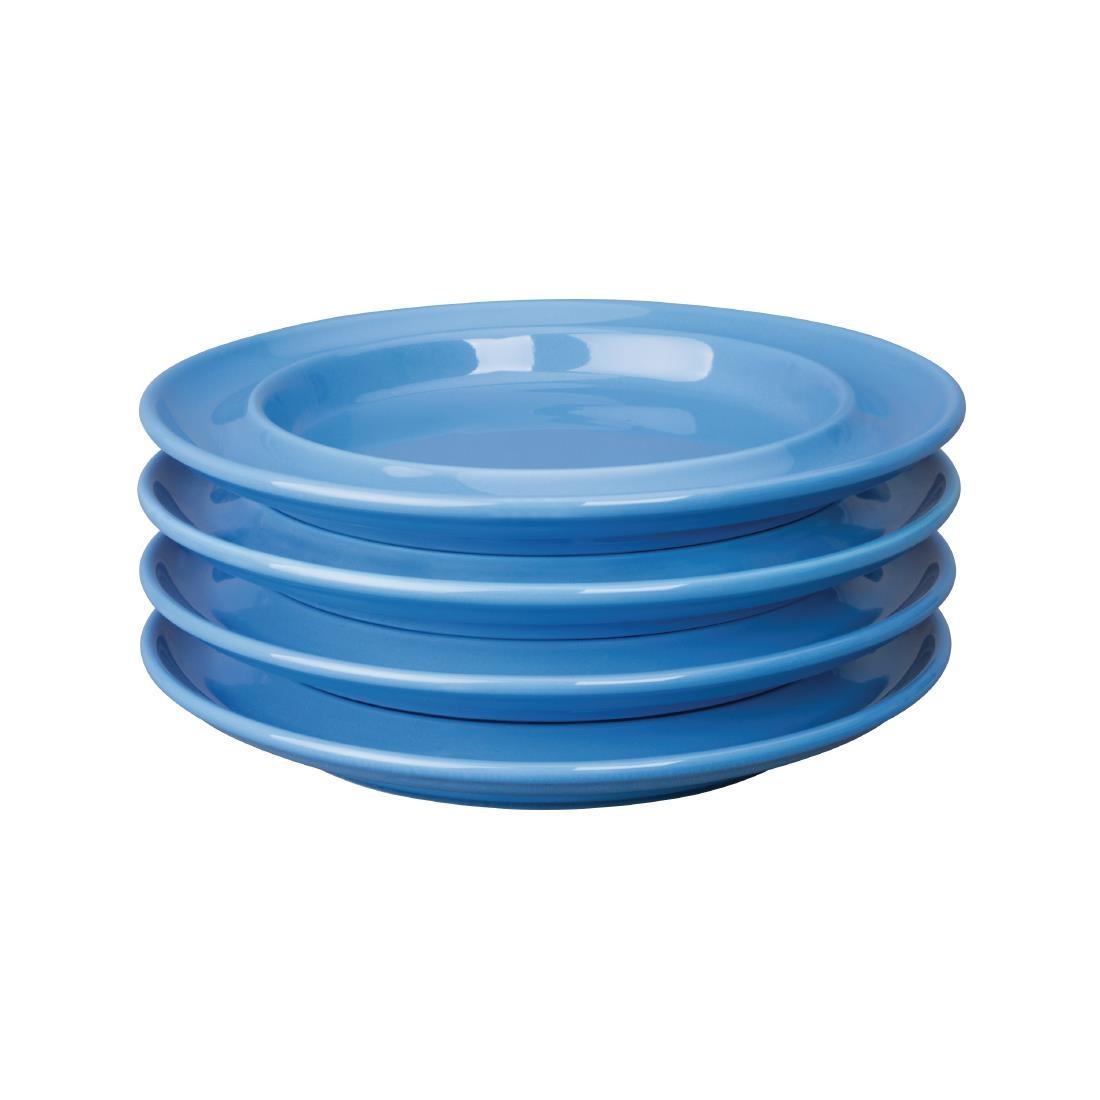 Olympia Heritage Raised Rim Plates Blue 203mm (Pack of 4) - DW140  - 4